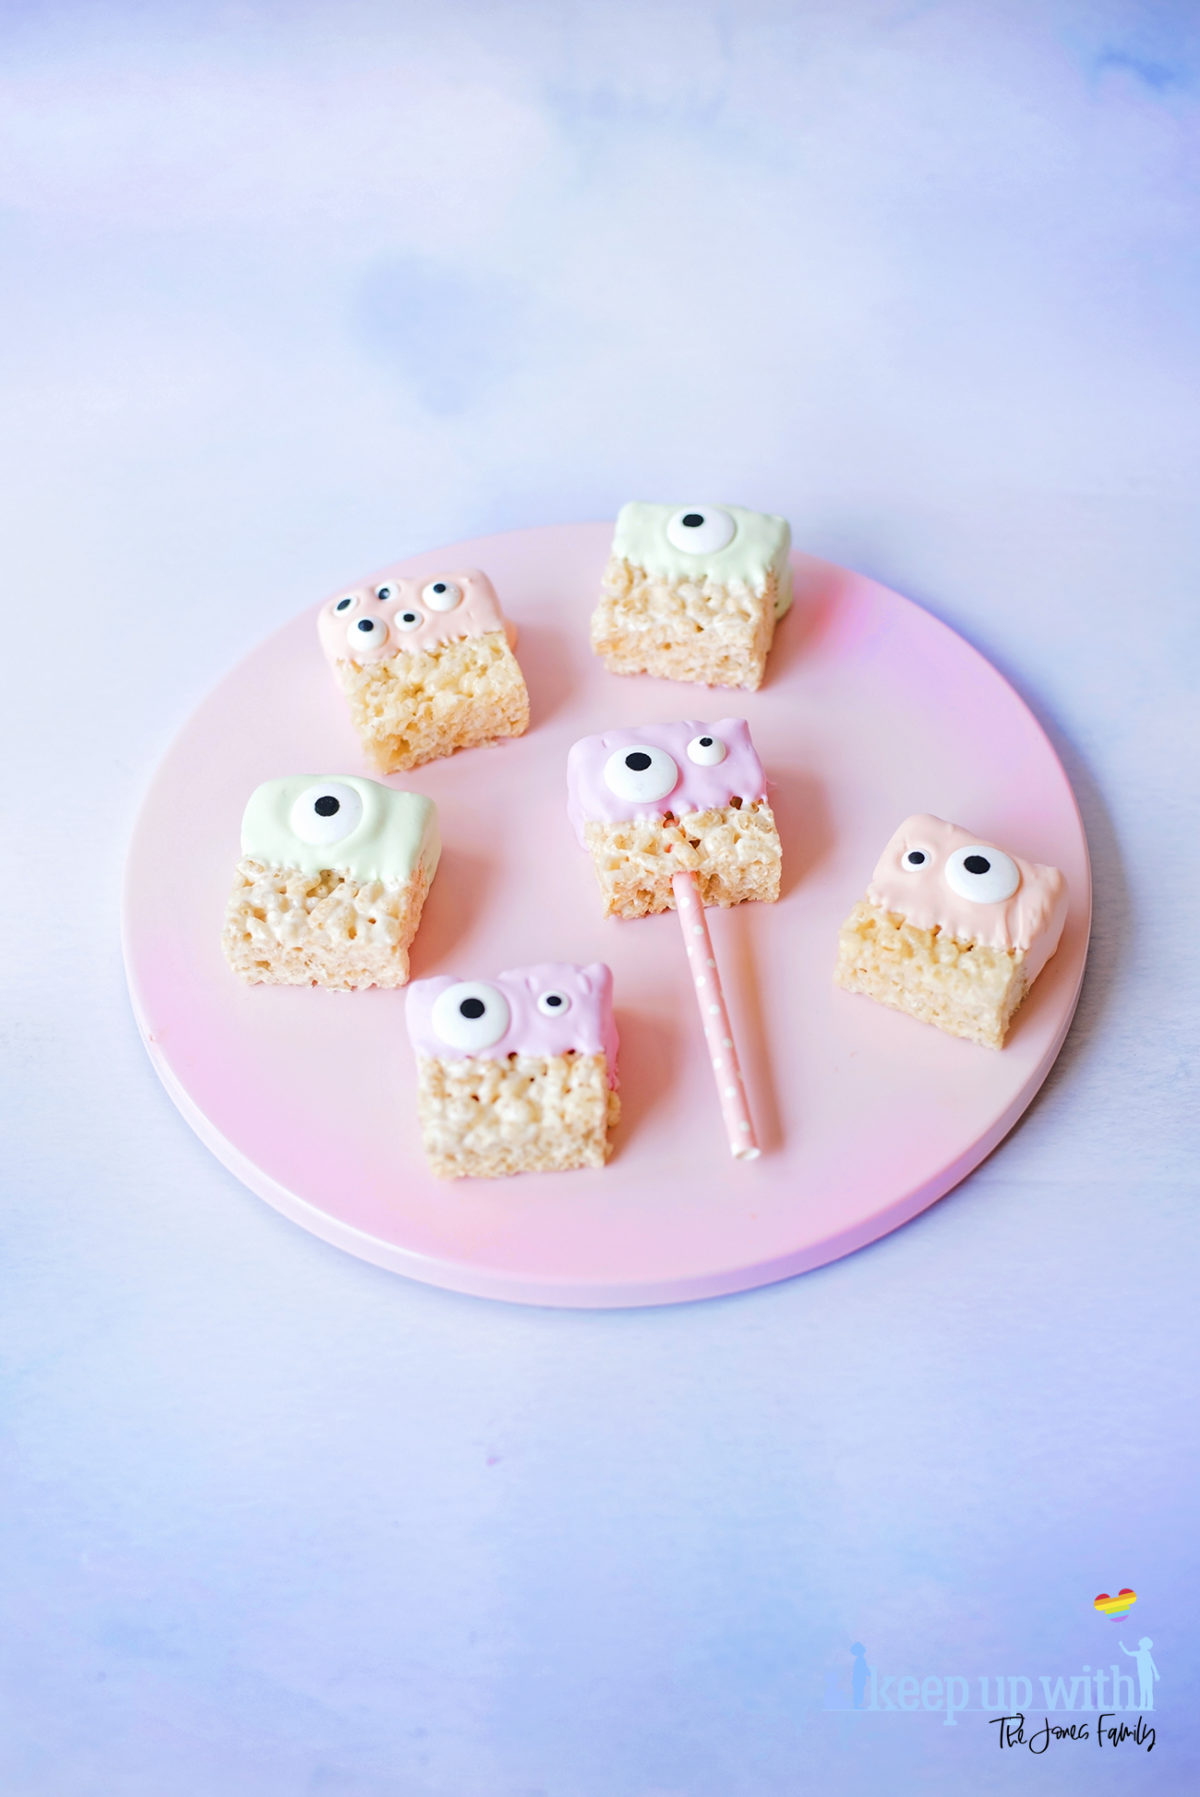 Image shows a pink cake plate with a variety of candy dipped pastel coloured alien rice krispie monsters. Image by Sara-Jayne for Keep Up With The Jones Family.